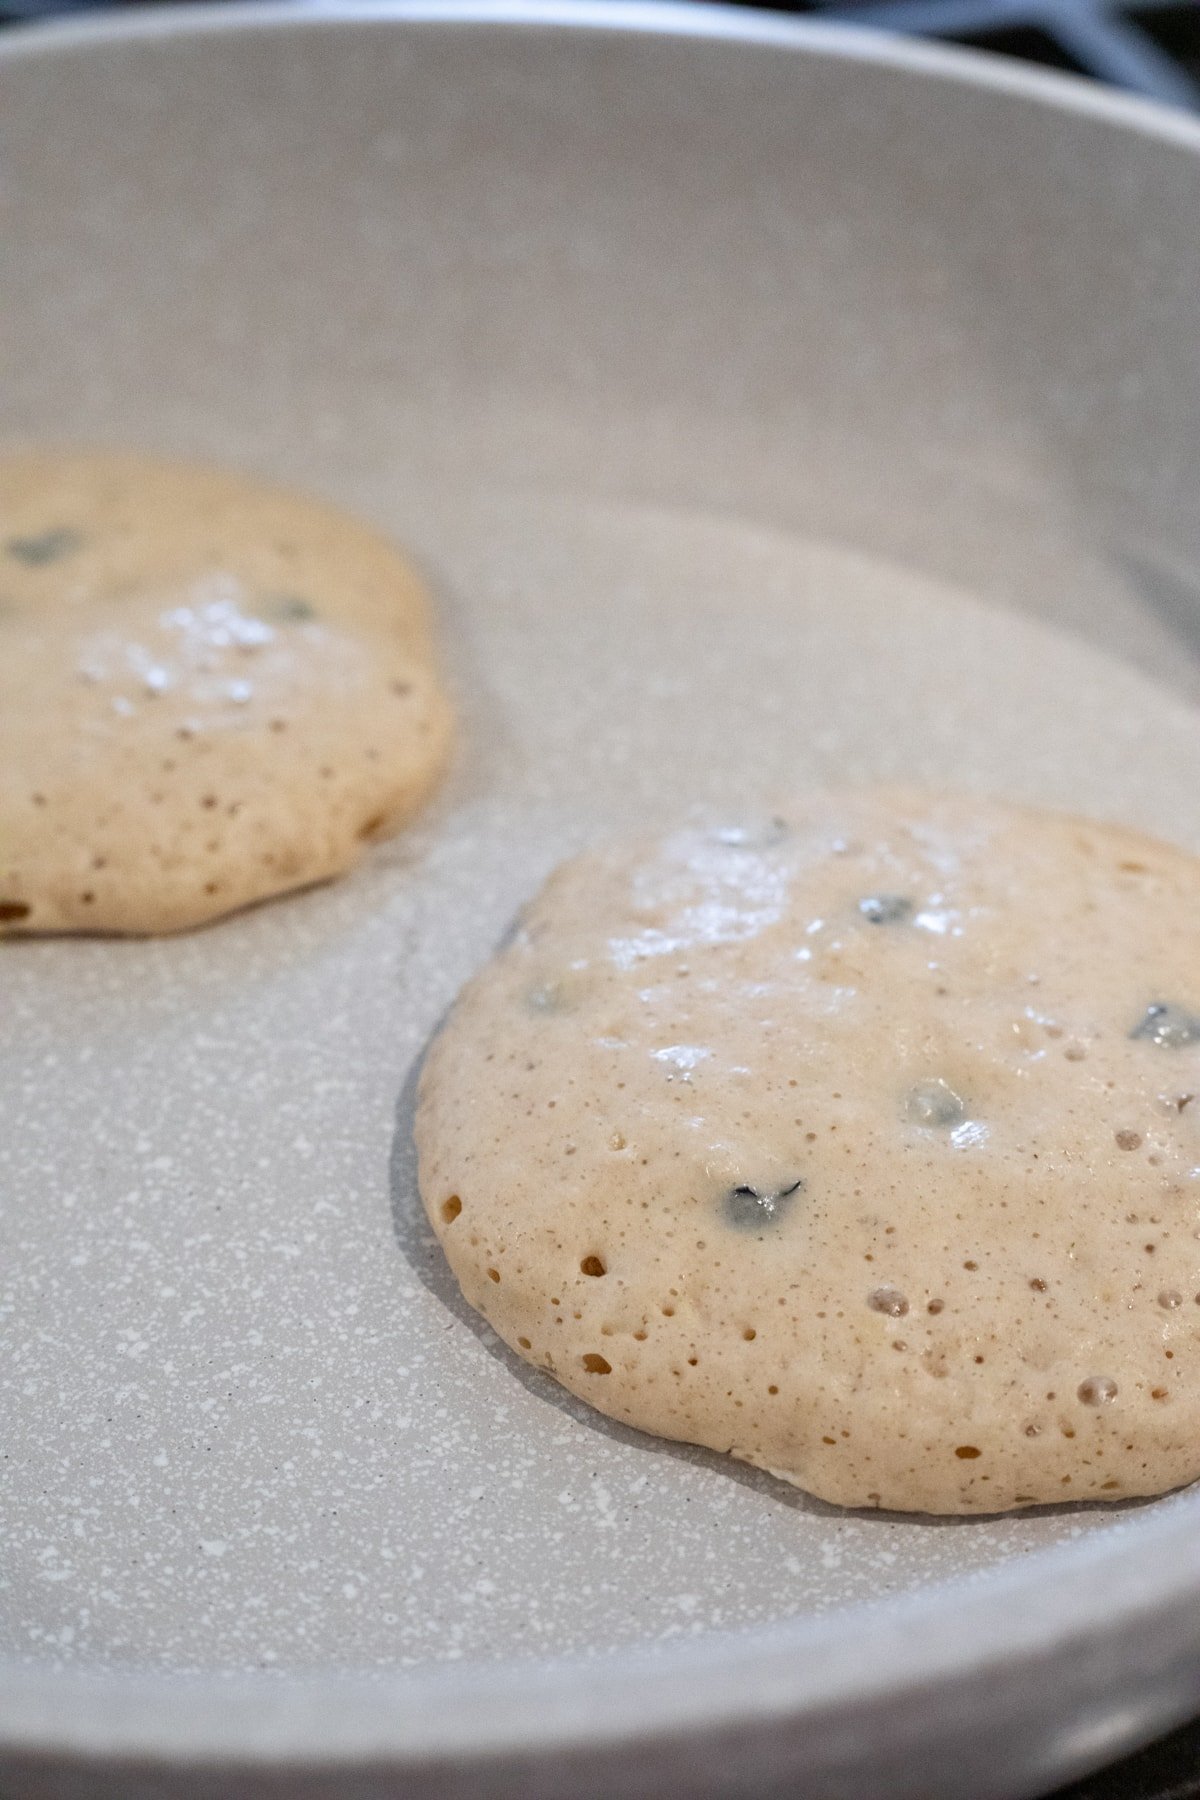 two blueberry pancakes cooking in a non-stick pan, showing bubbles.